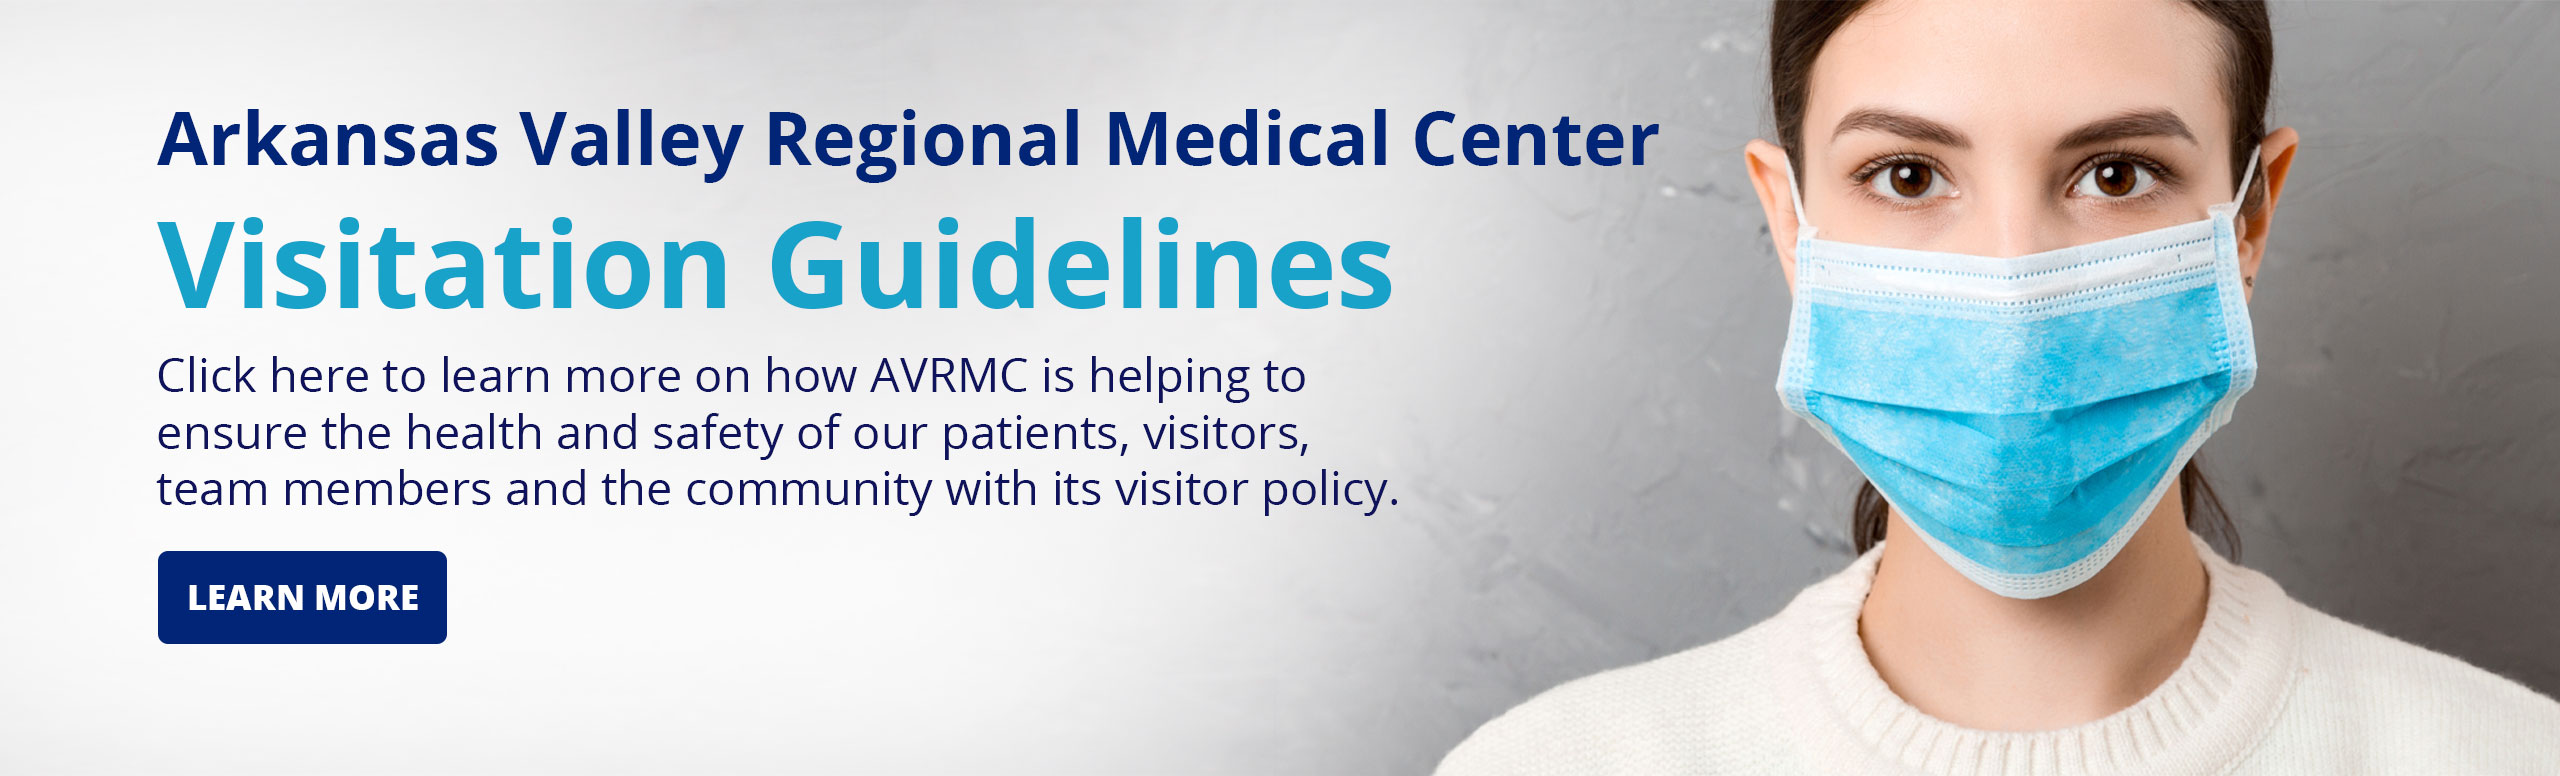 Banner picture of a female wearing a mask. Banner says:

Arkansas Valley Regional Medical Center

Visitation Guidelines

Click here to learn more on how AVRMC is helping to ensure the health and safety of our patients, visitors, team members, and community with its visitor policy.

(LEARN MORE)